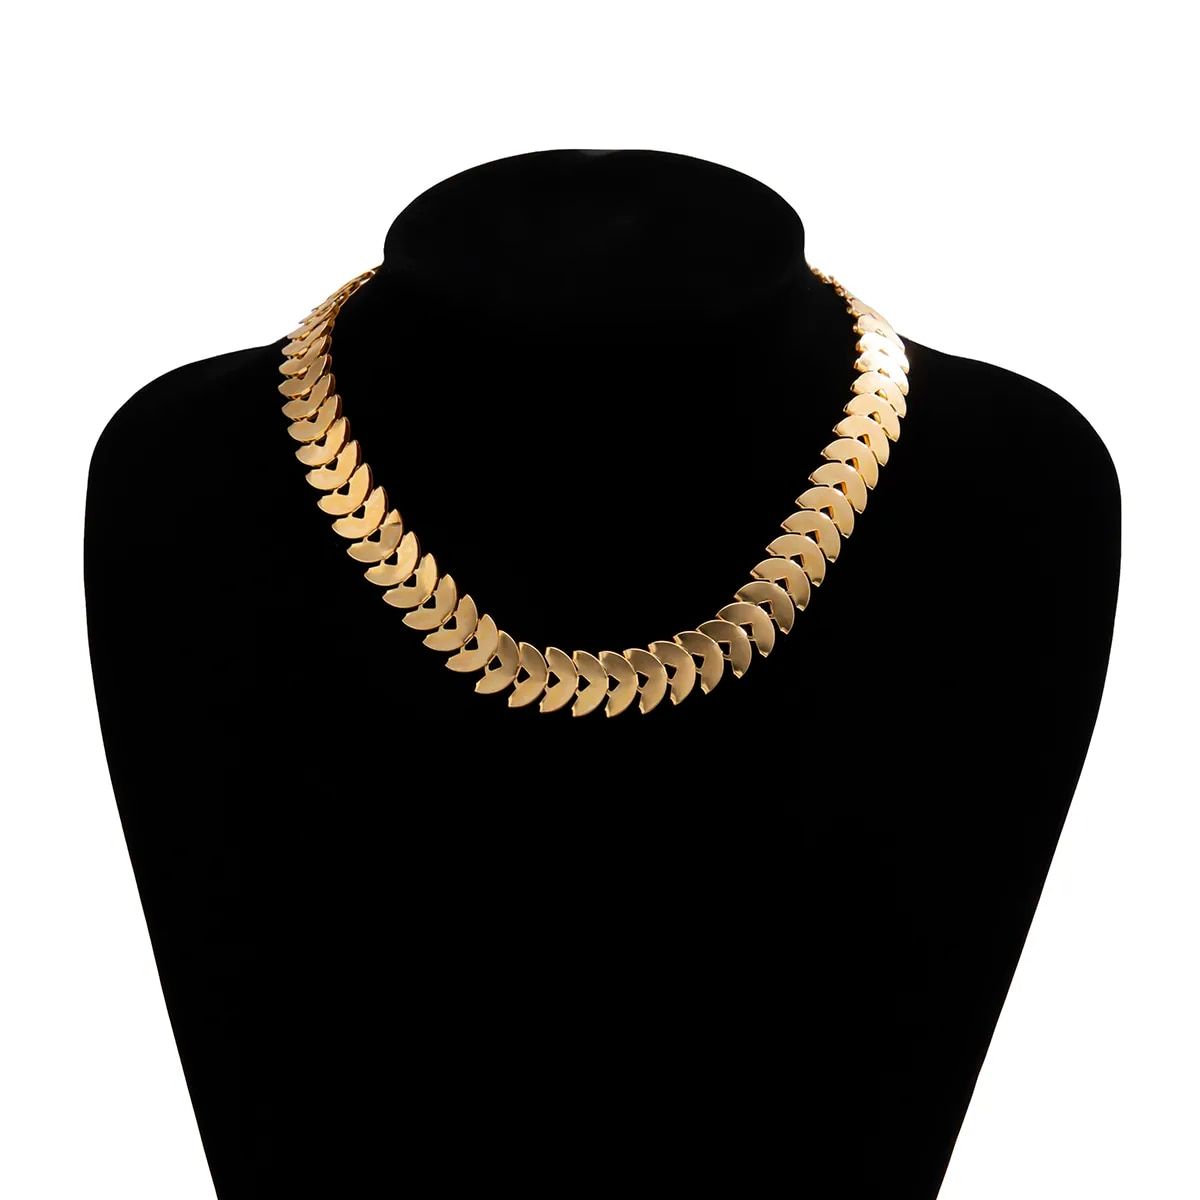 Gold Petal Choker Necklace for Women with leaf-shaped links displayed on a black mannequin bust against a white background, epitomizing the latest fashion trends.